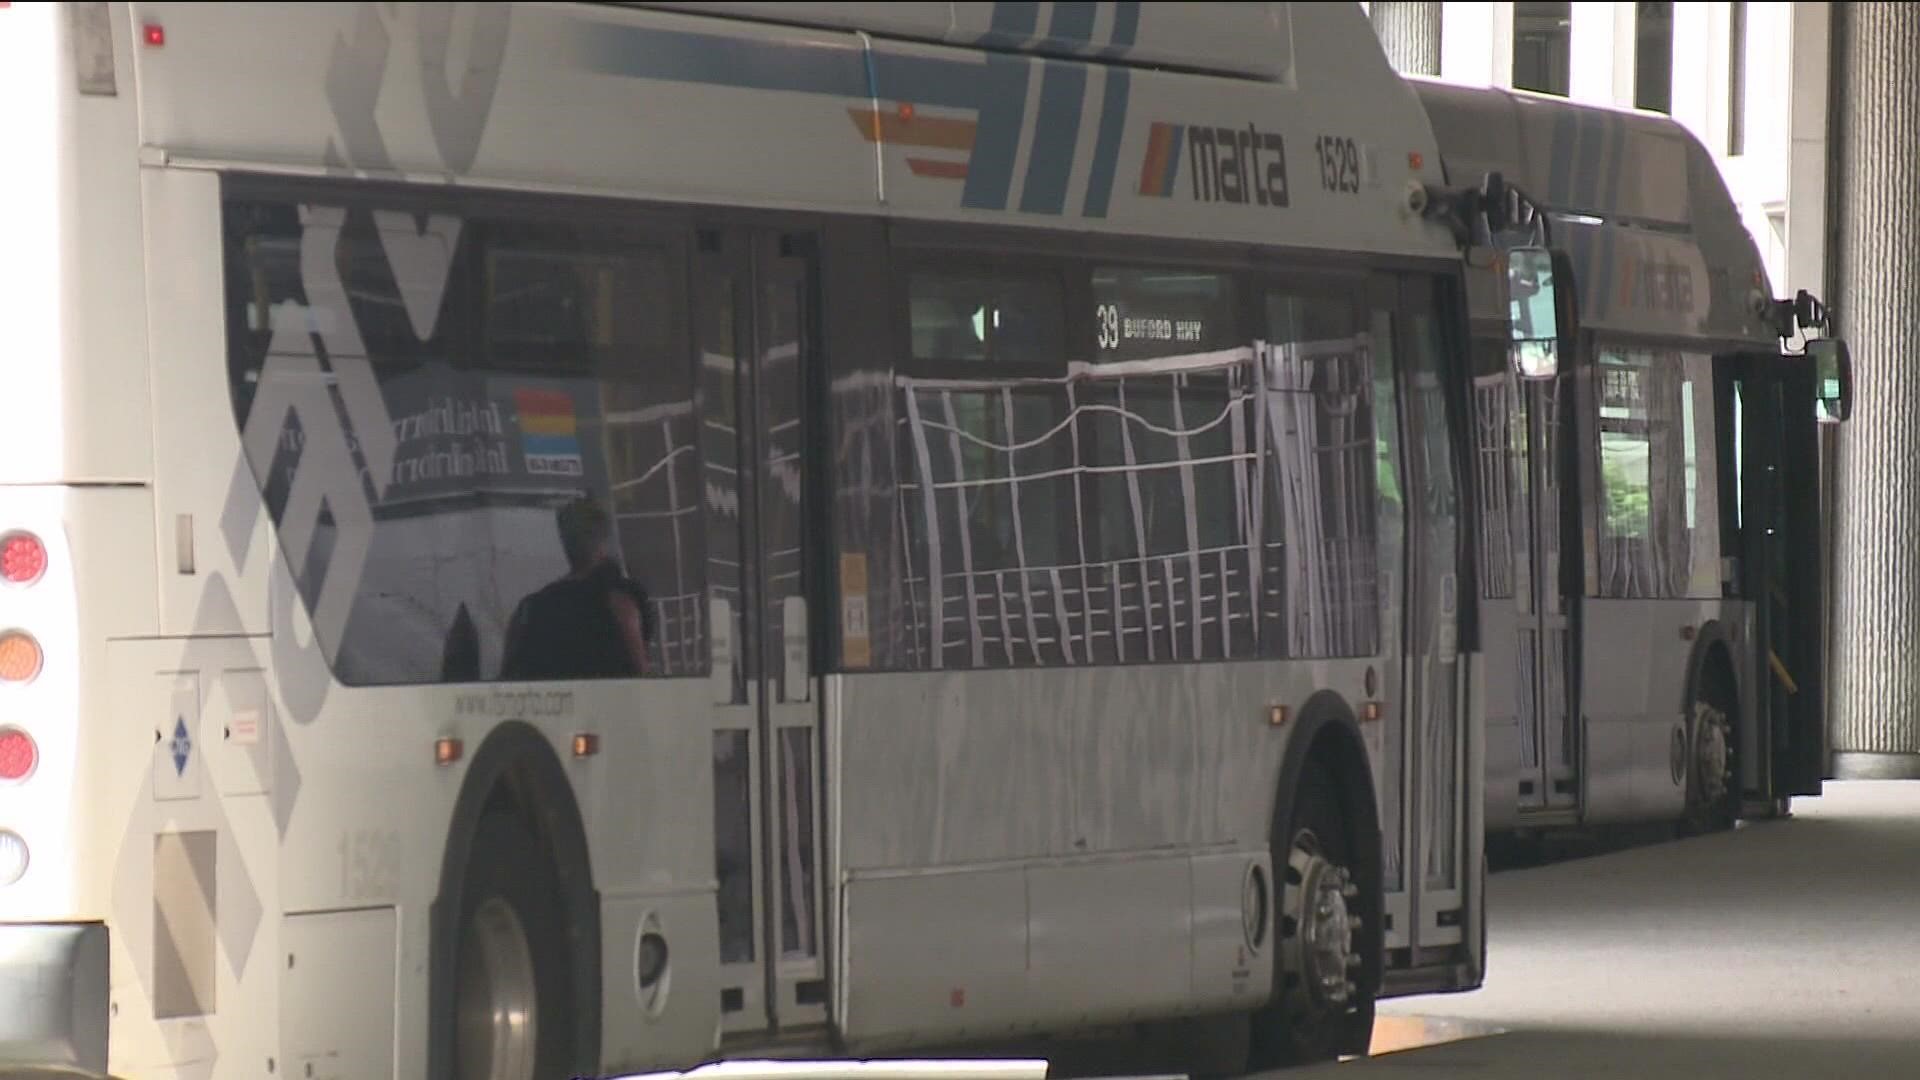 Marta officials are looking at other options, despite promises for a light rail system.